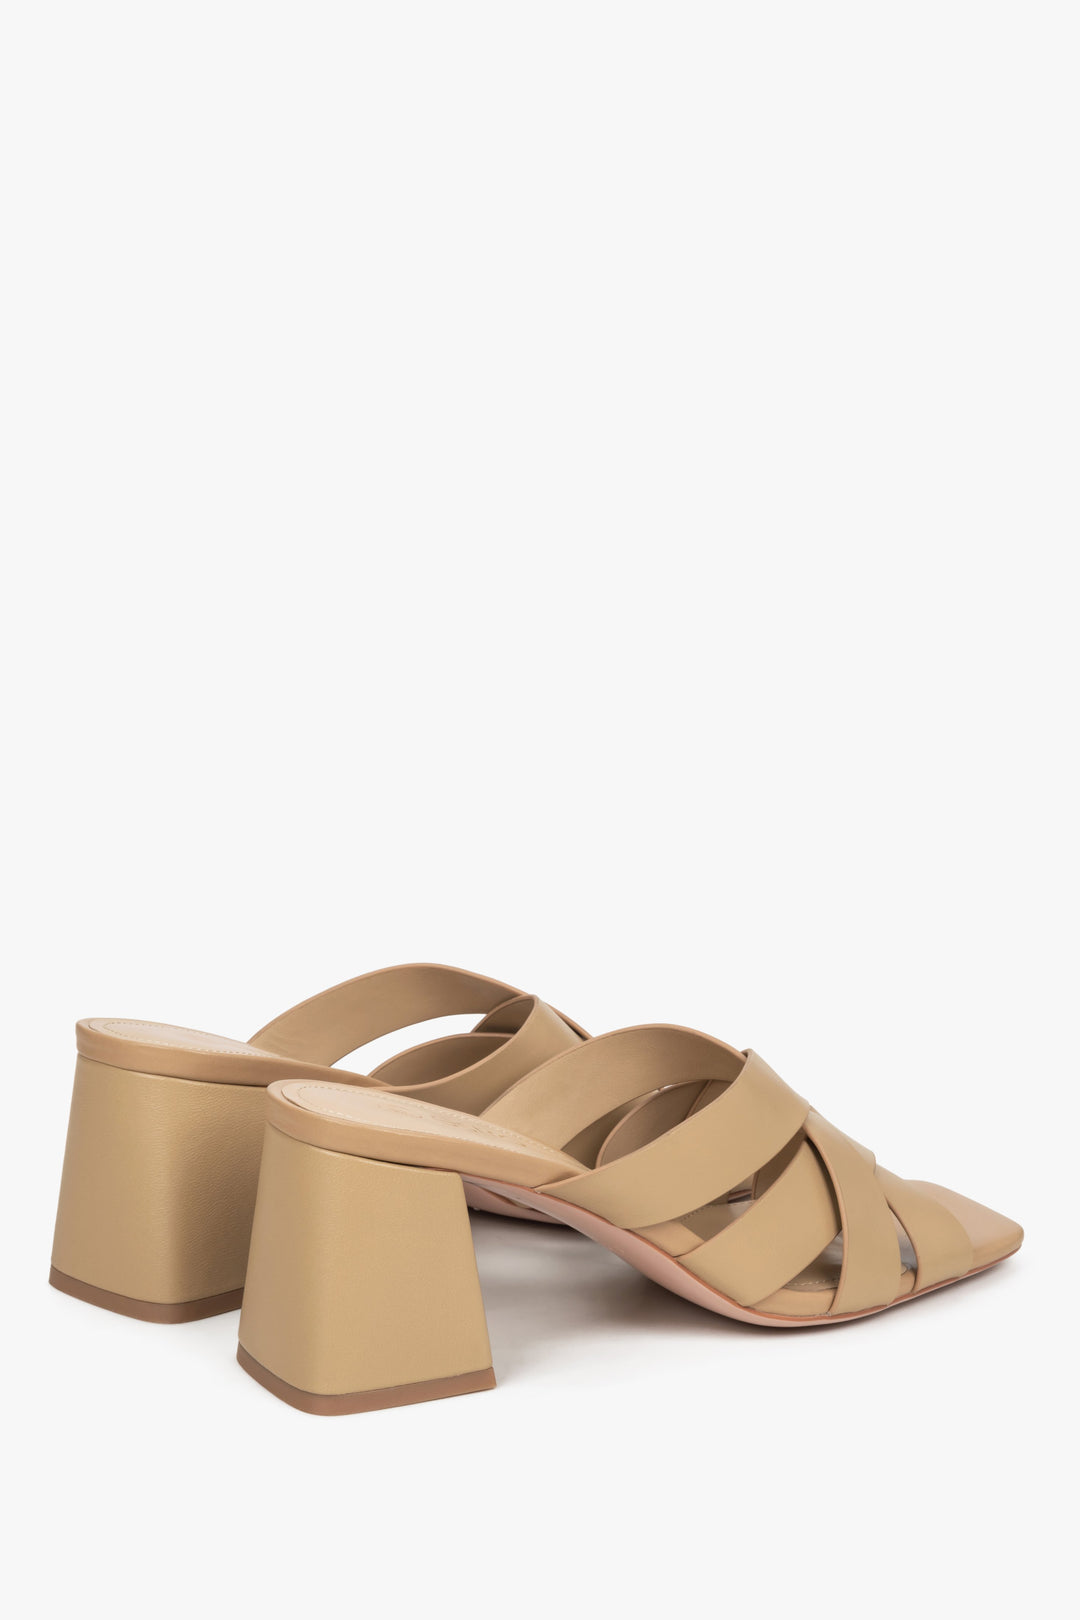 Leather women's beige sandals with a block heel by Estro - close-up of the back and profile of the model.